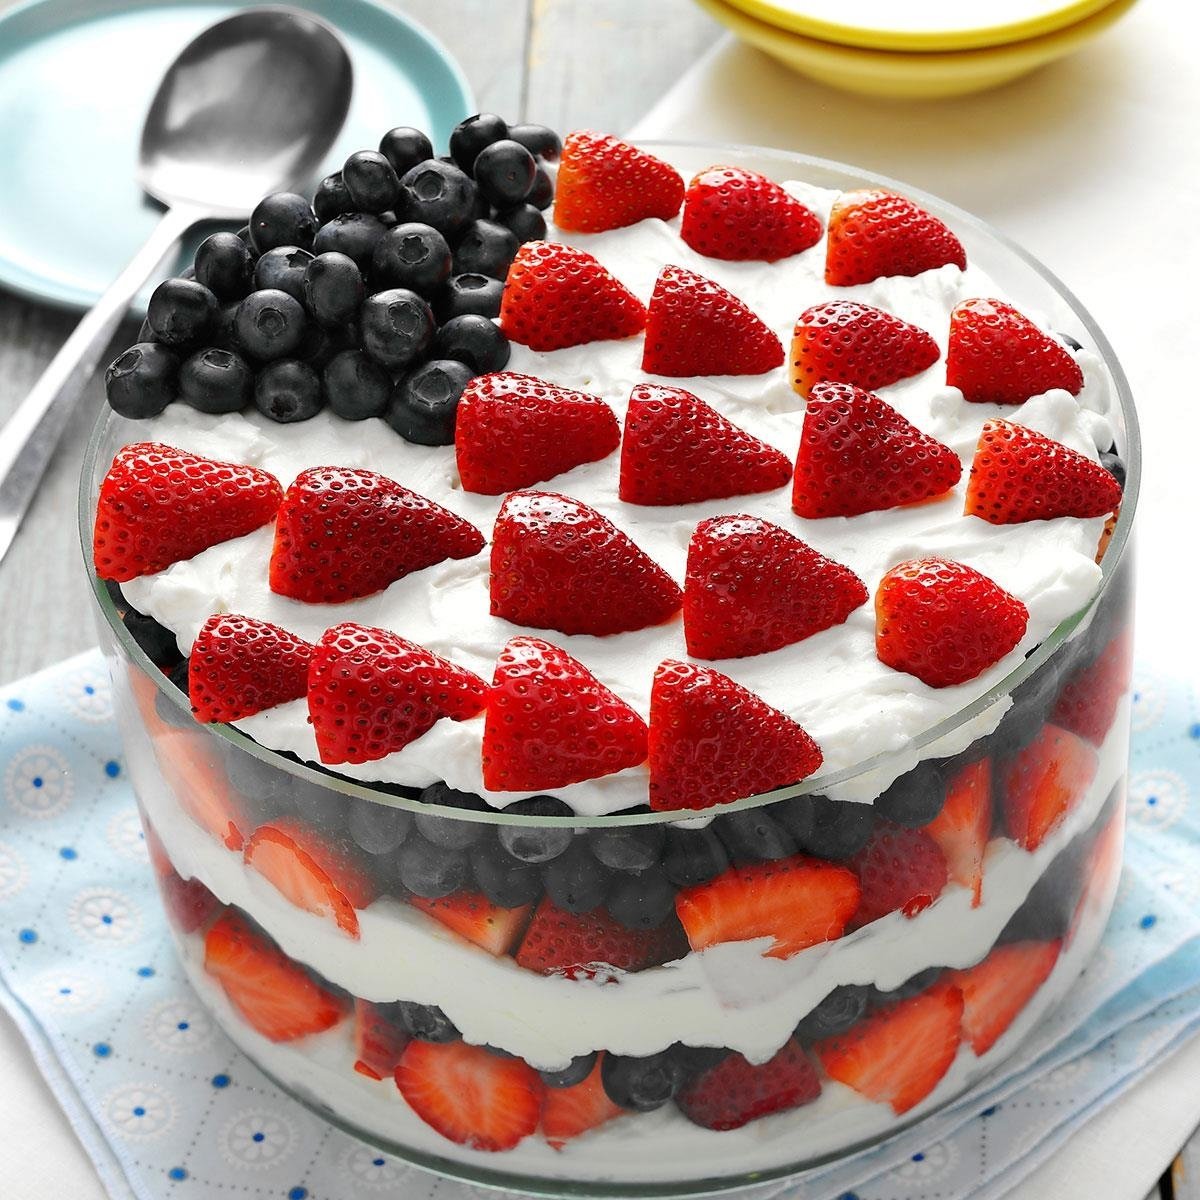 10 Spectacular 4Th Of July Dessert Ideas red white and blue dessert recipe taste of home 1 2023